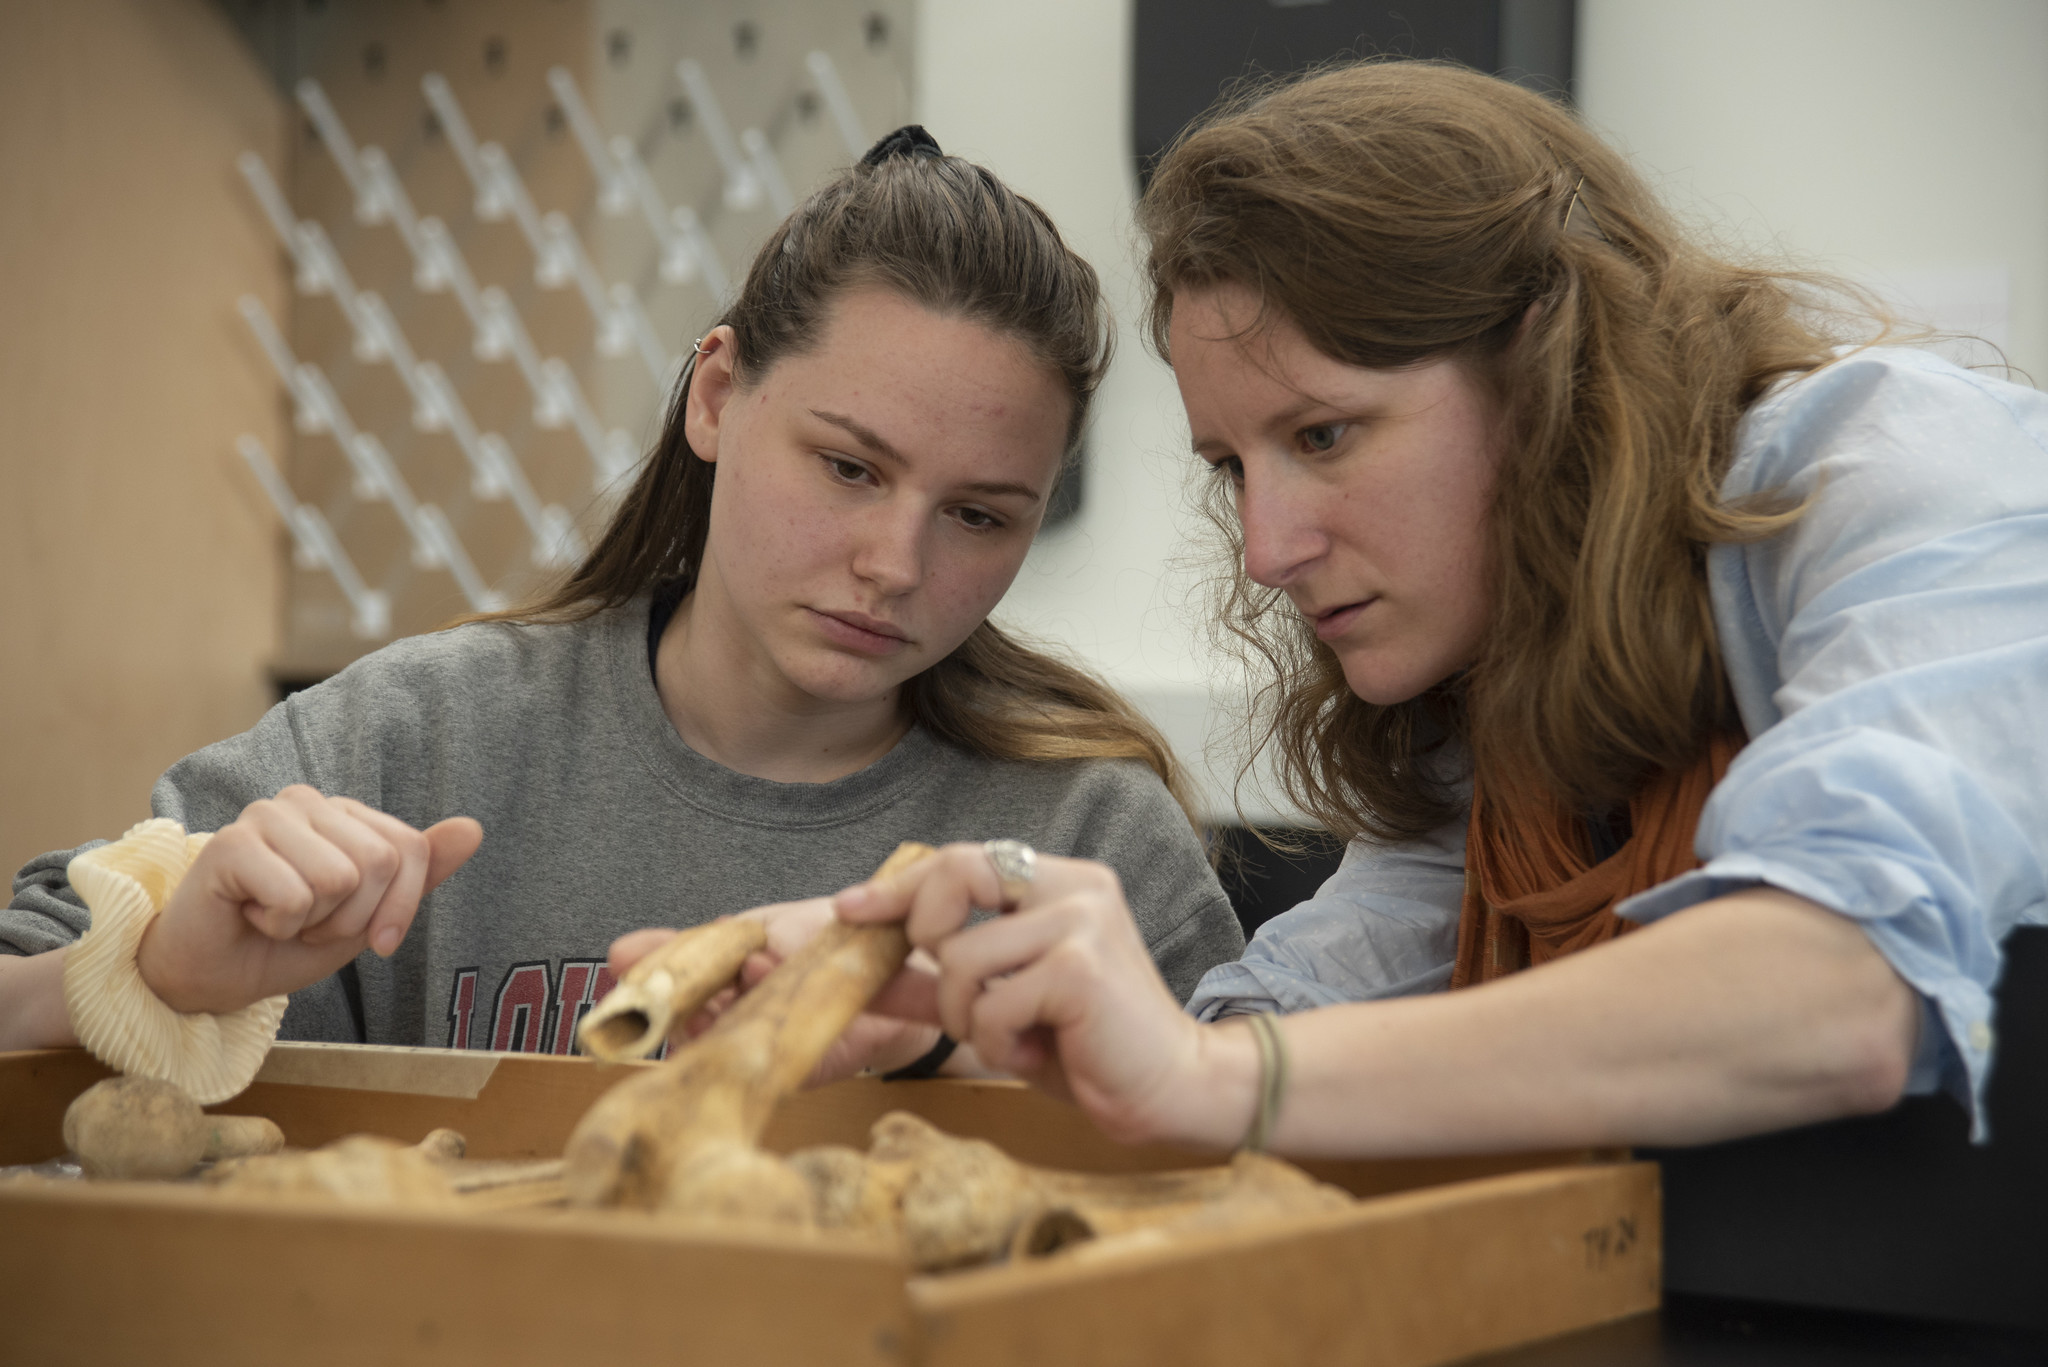 Professor assisting student with review of archeological items